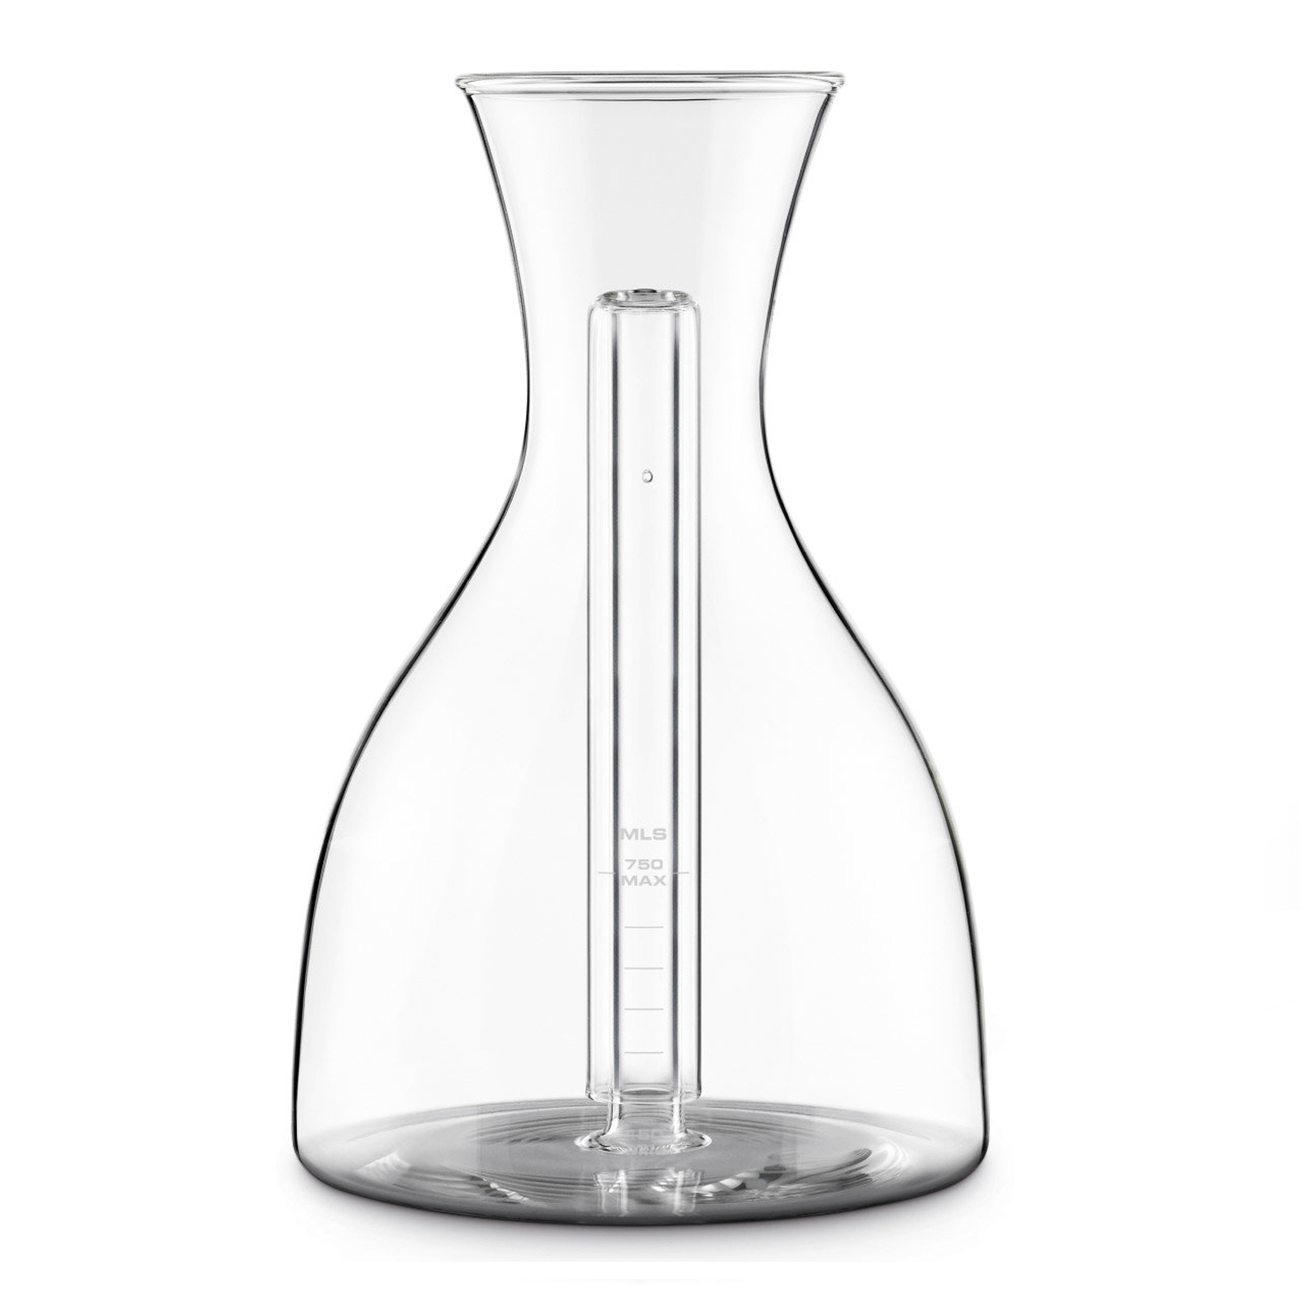 the So₂mmelier 750mL Carafe